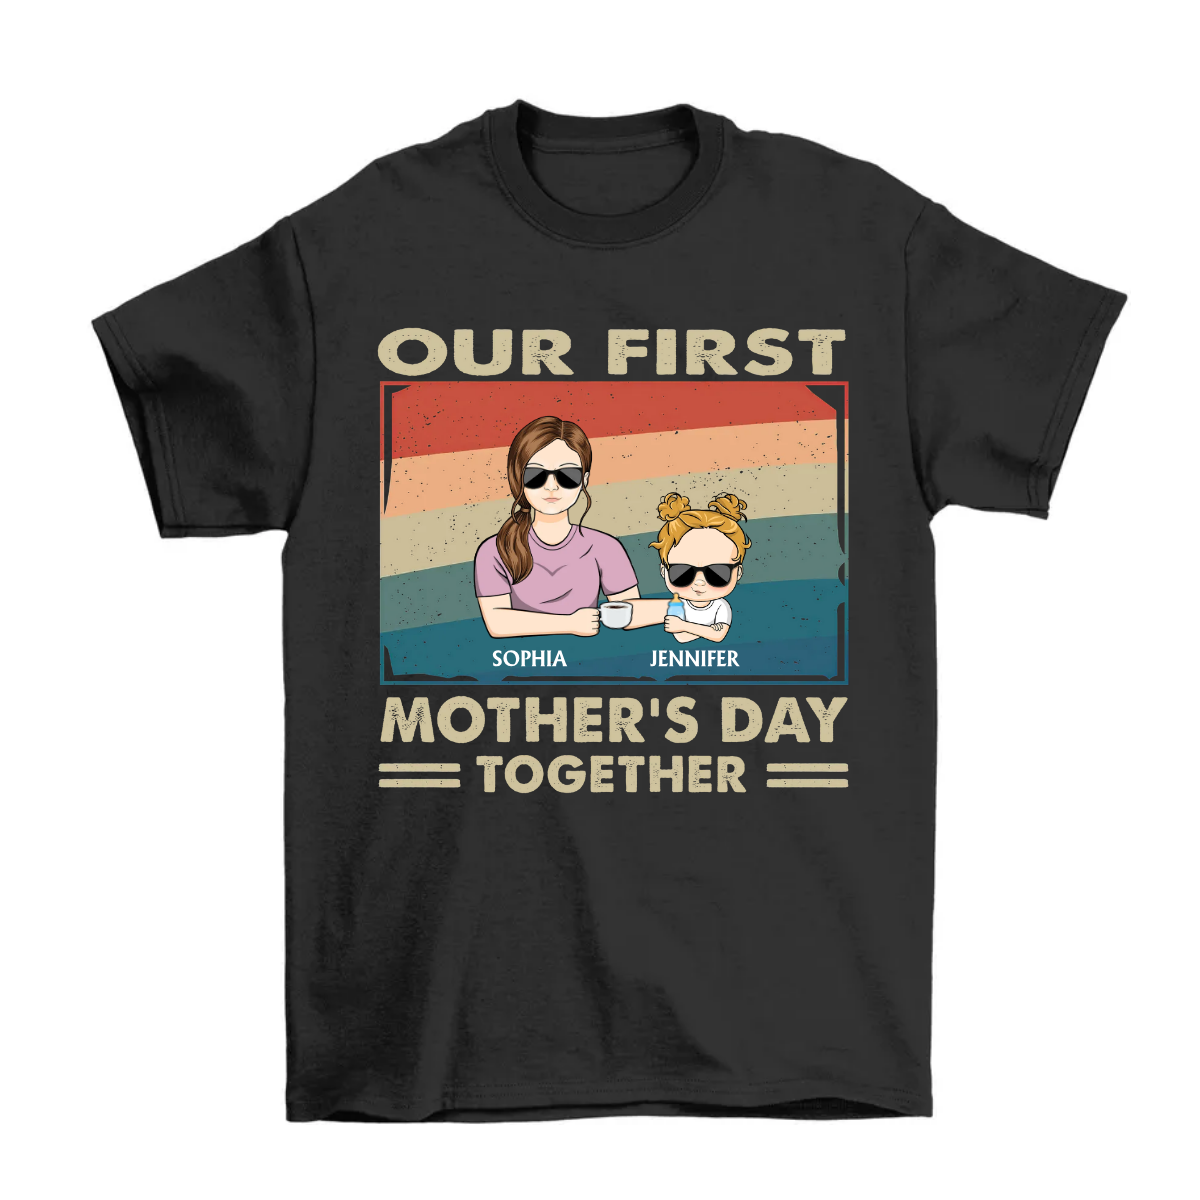 Our First Mother's Day Together - Gift For Mom, Mother, Grandma - Personalized T Shirt